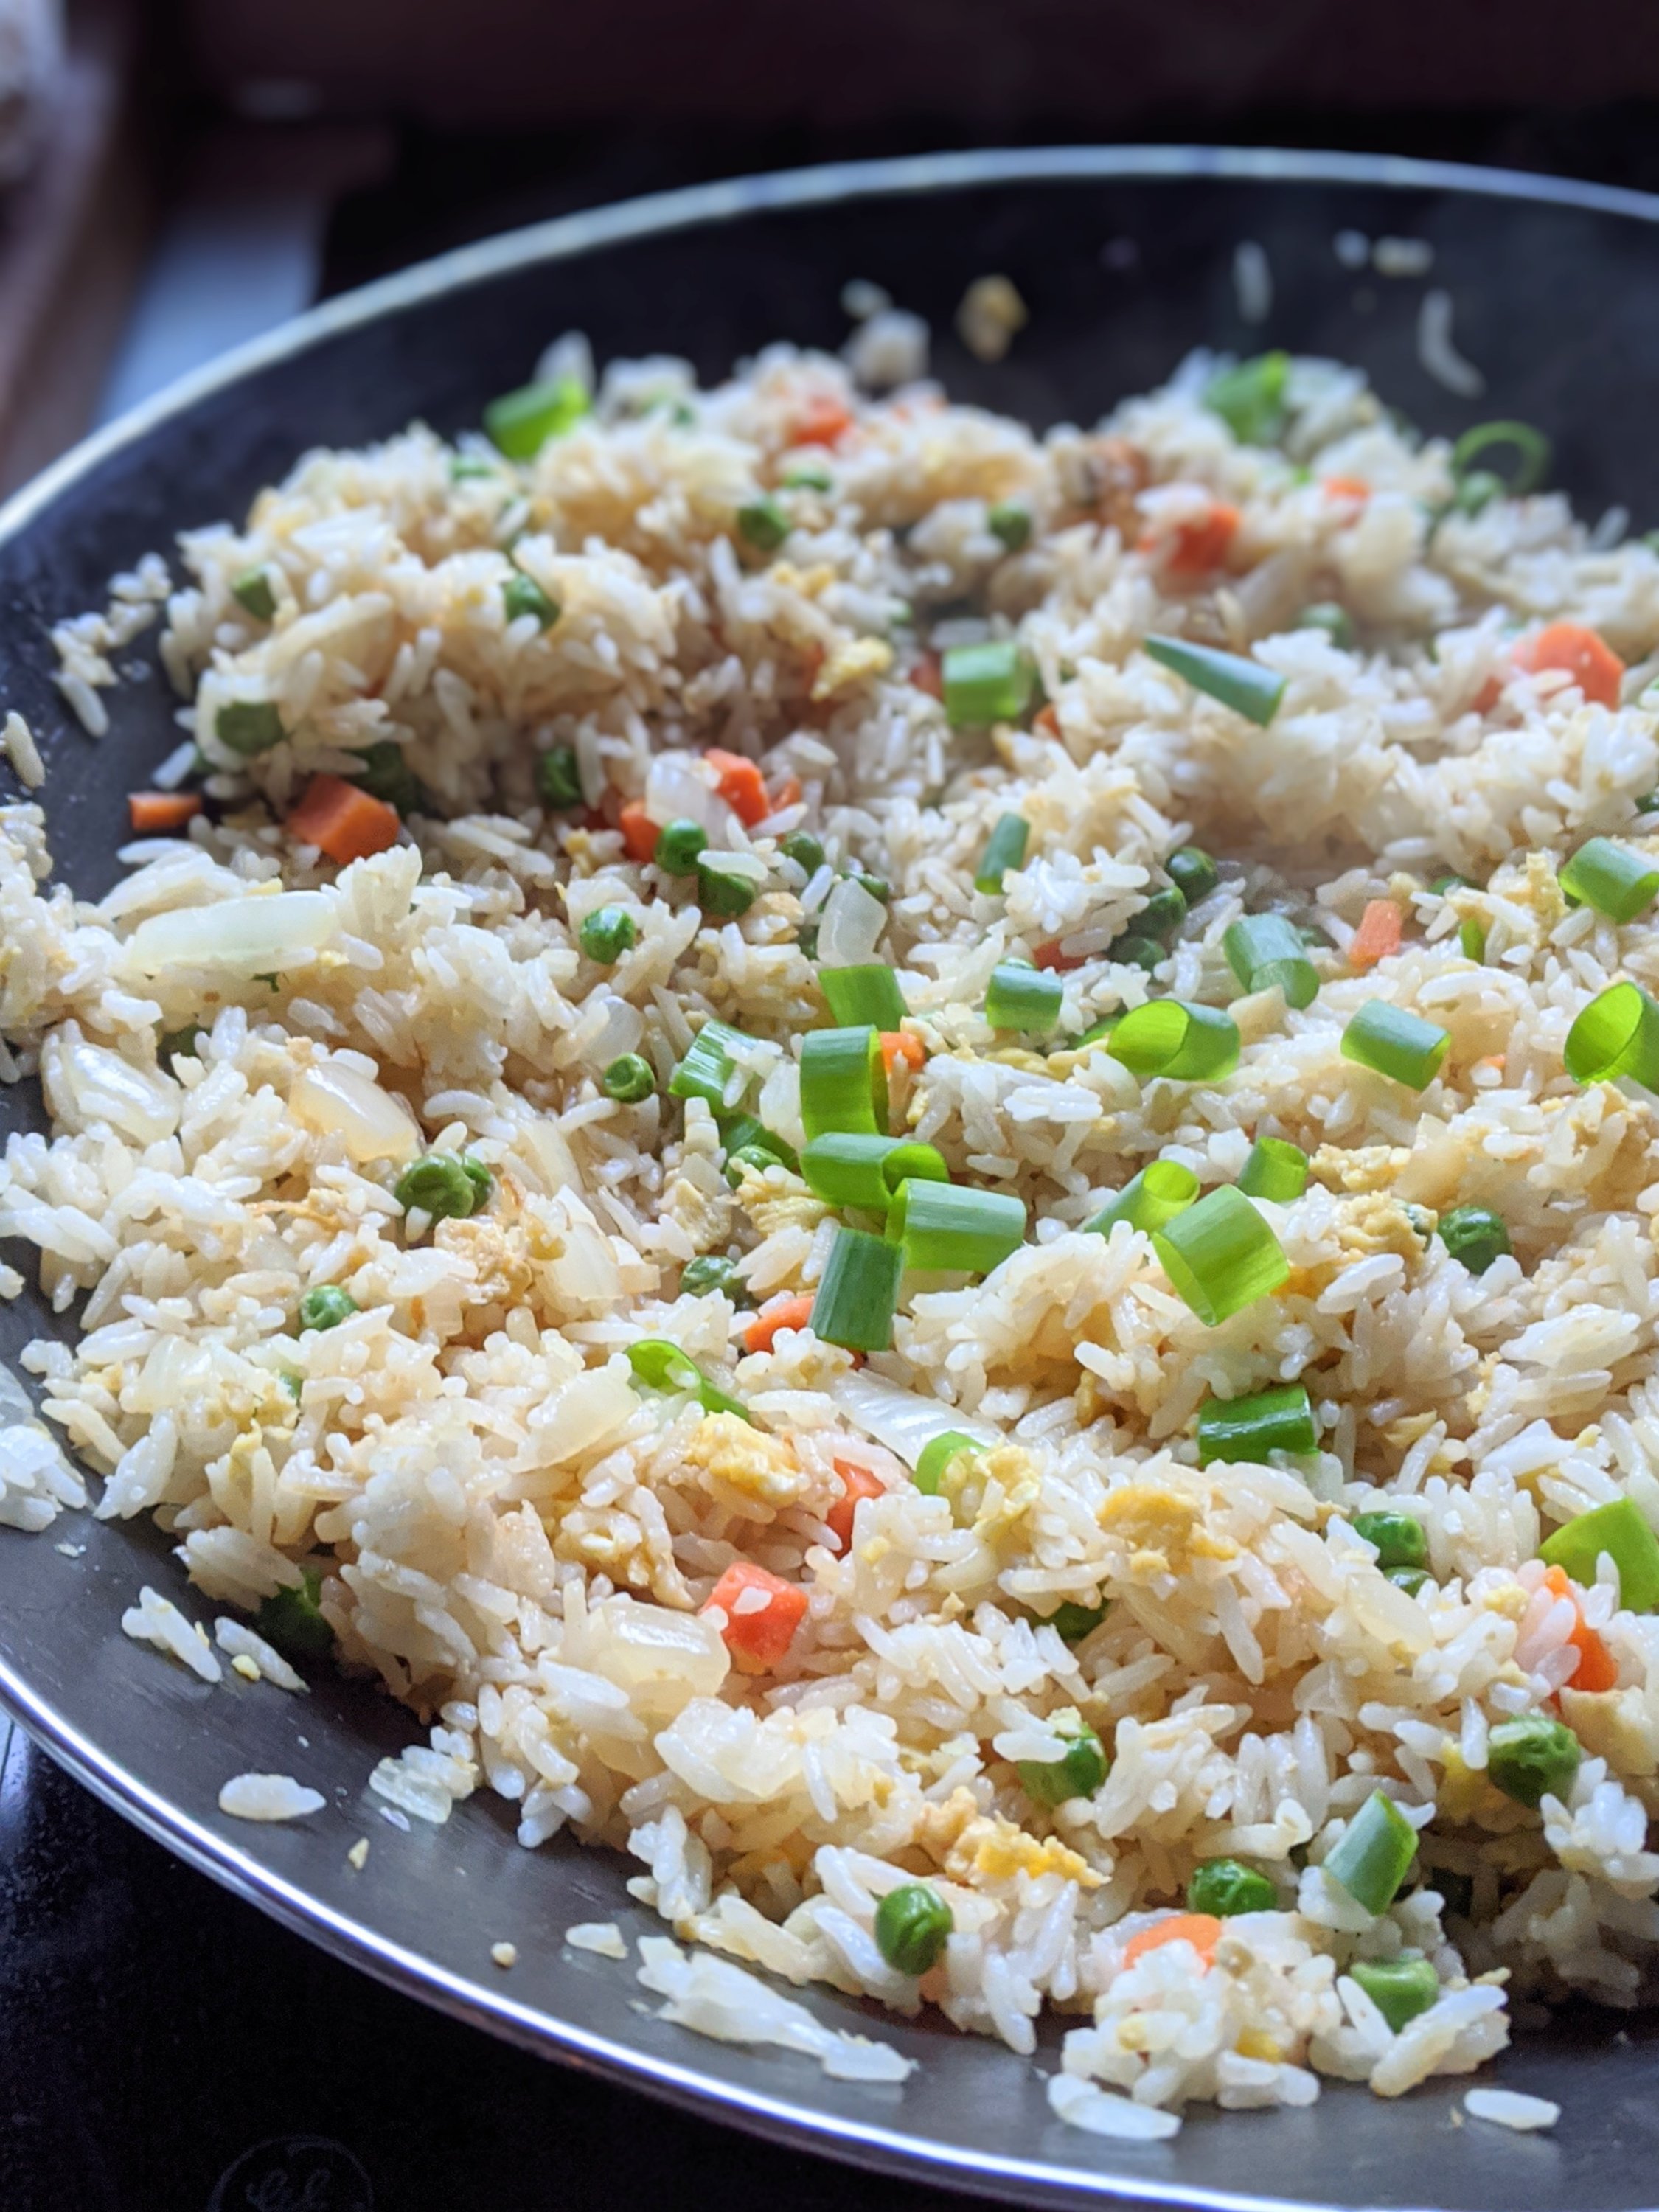 15 minutue fried rice using leftover rice vegan vegetarian healthy gluten free meatless no meat high protein jasmine rice or masmati white or brown leftover rice recipes